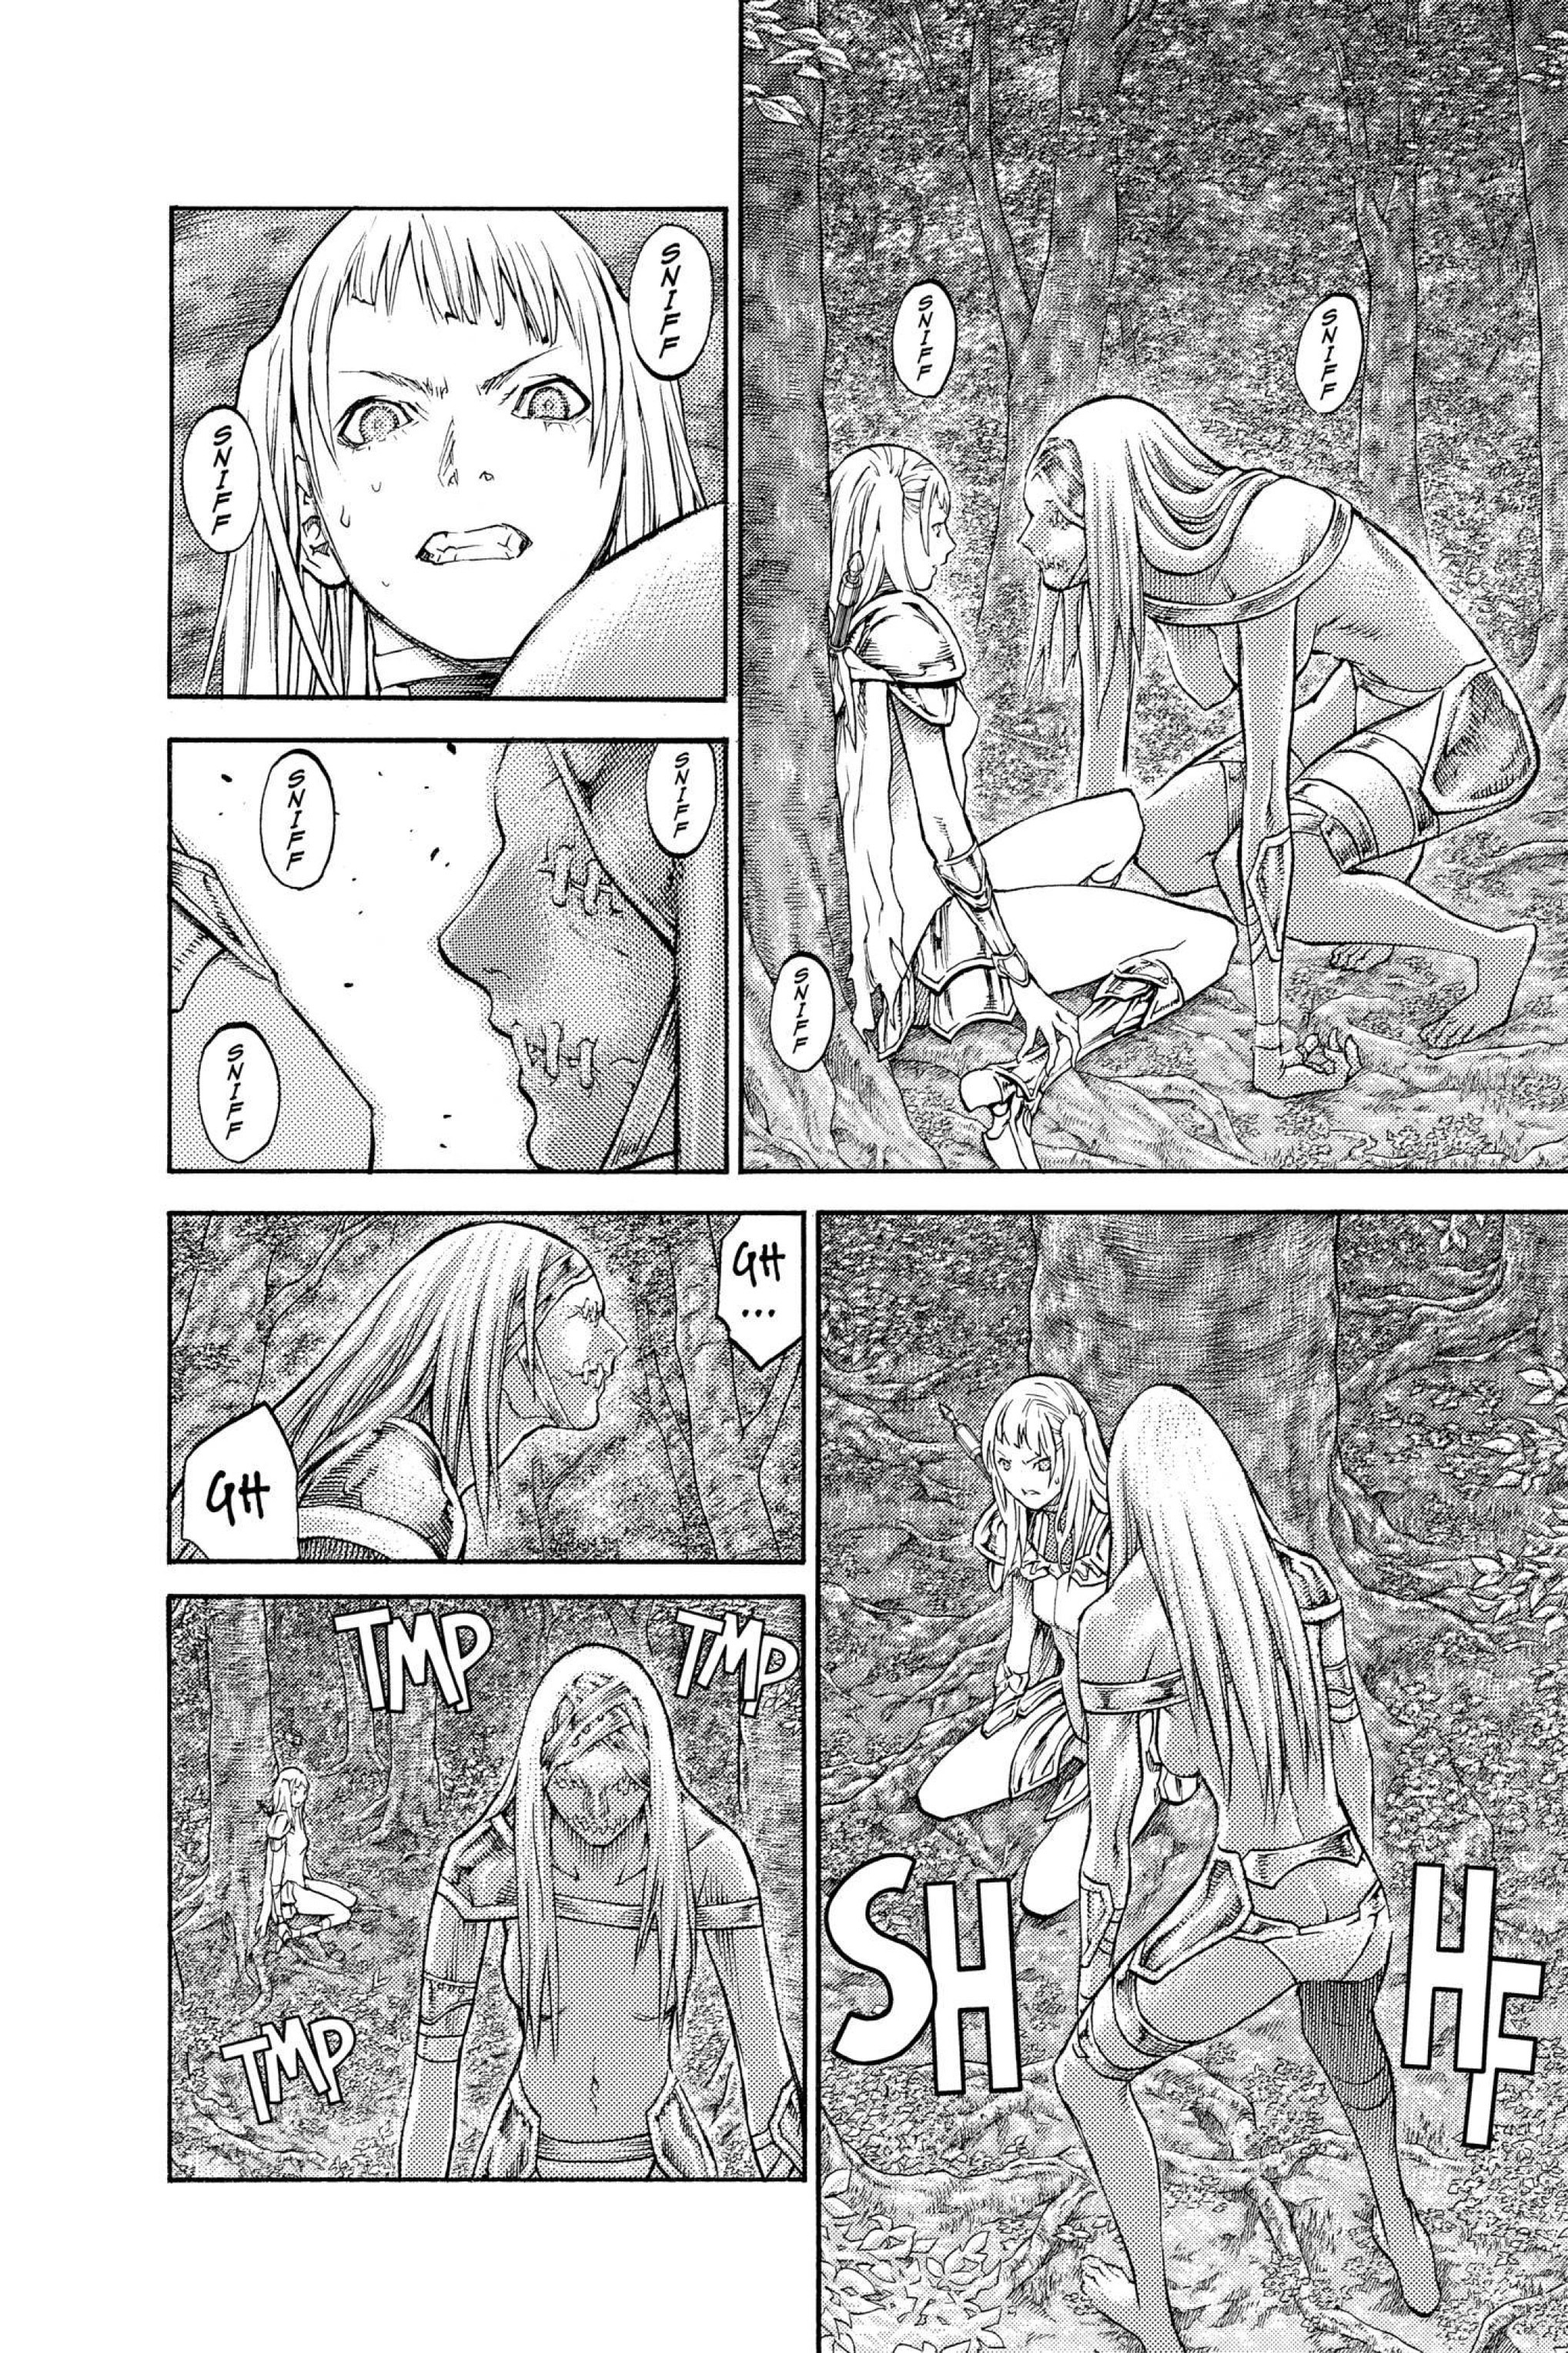 Read online Claymore comic -  Issue #16 - 100